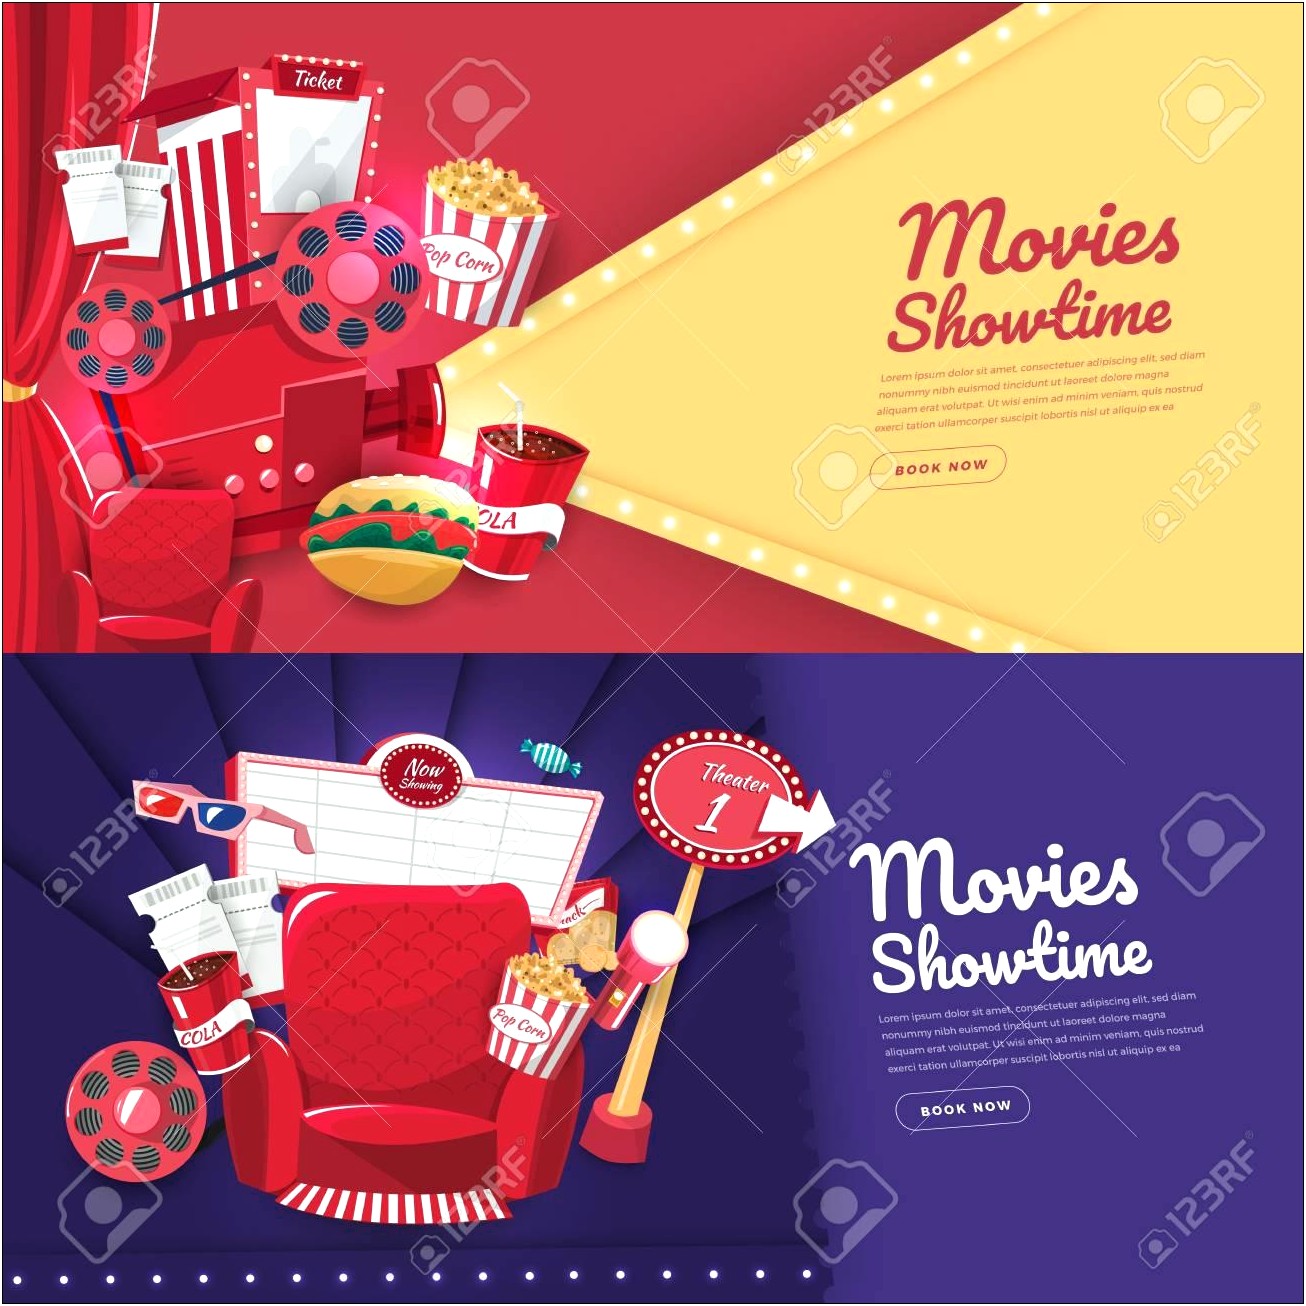 Theater And Film Poster Templates Free Download